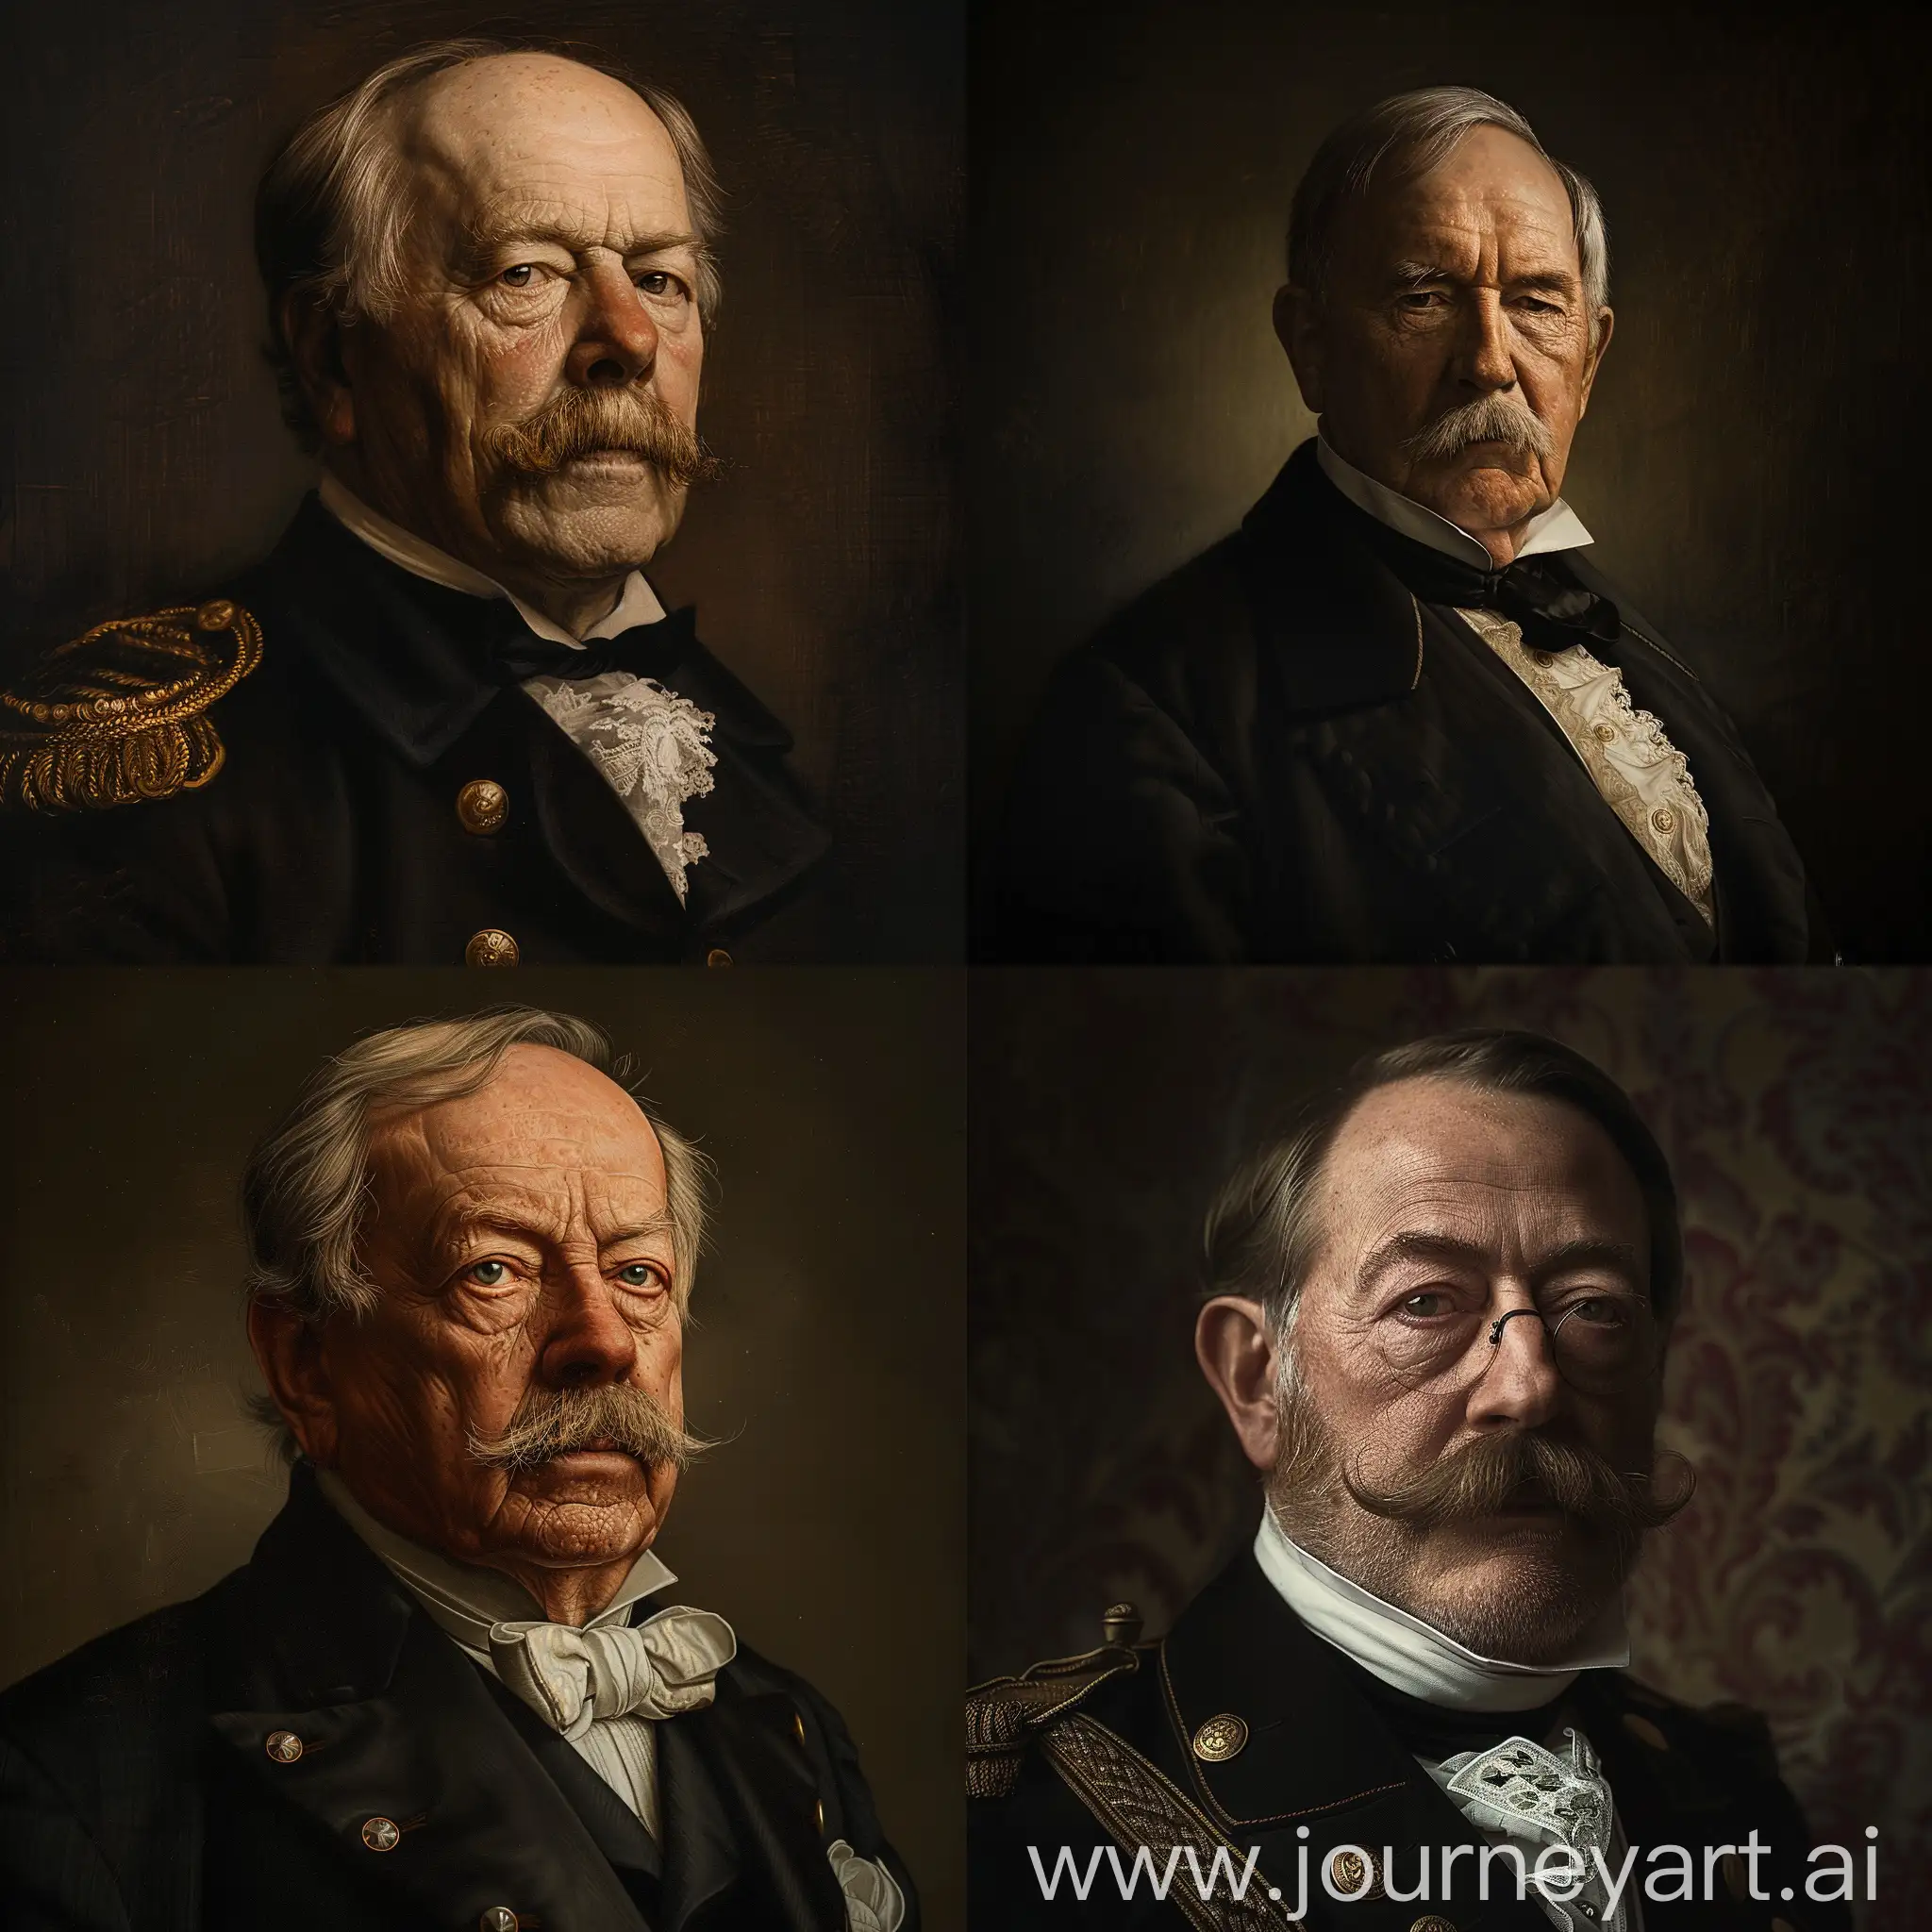 Realistic portrait of Otto von Bismarck, chiaroscuro lighting, detailed facial features, period-accurate attire, historical European setting, subtle textures, dramatic shadows